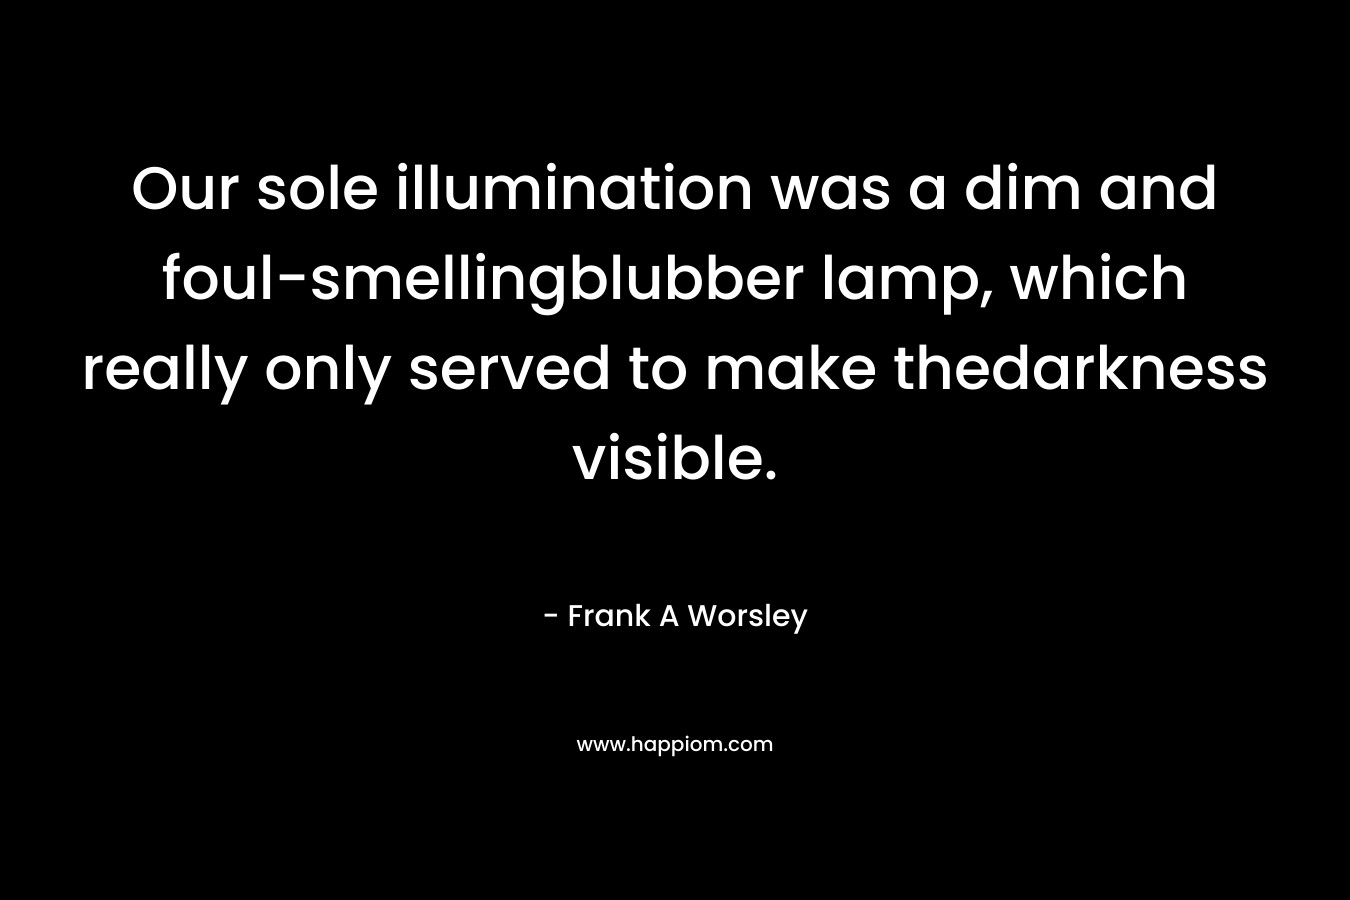 Our sole illumination was a dim and foul-smellingblubber lamp, which really only served to make thedarkness visible. – Frank A Worsley